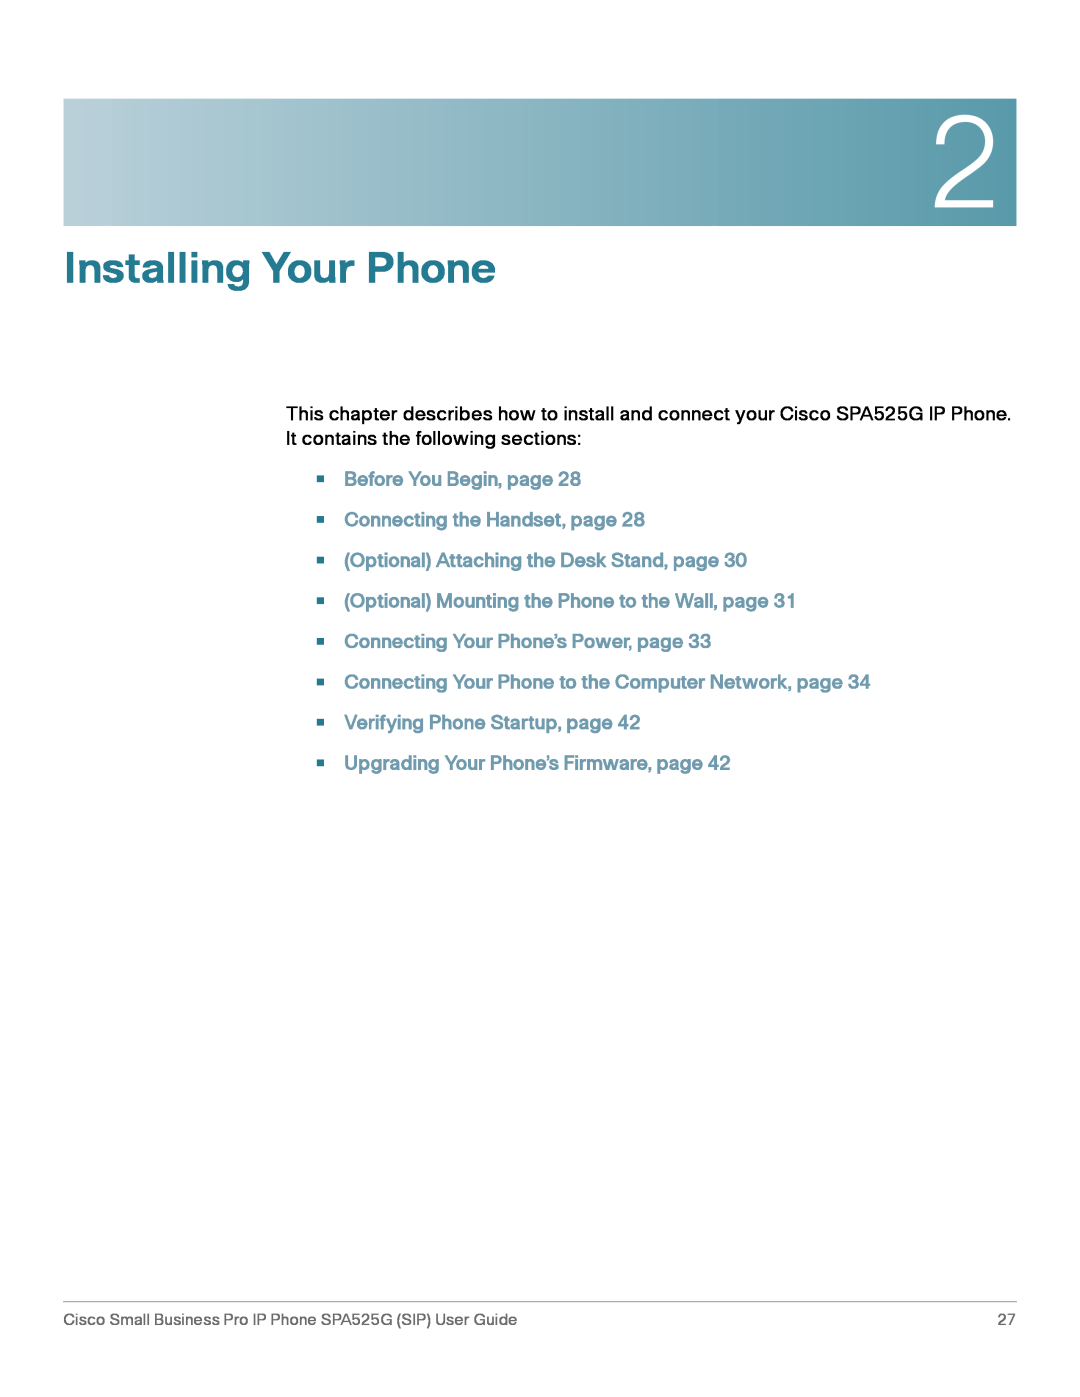 Cisco Systems SPA525G manual Installing Your Phone 